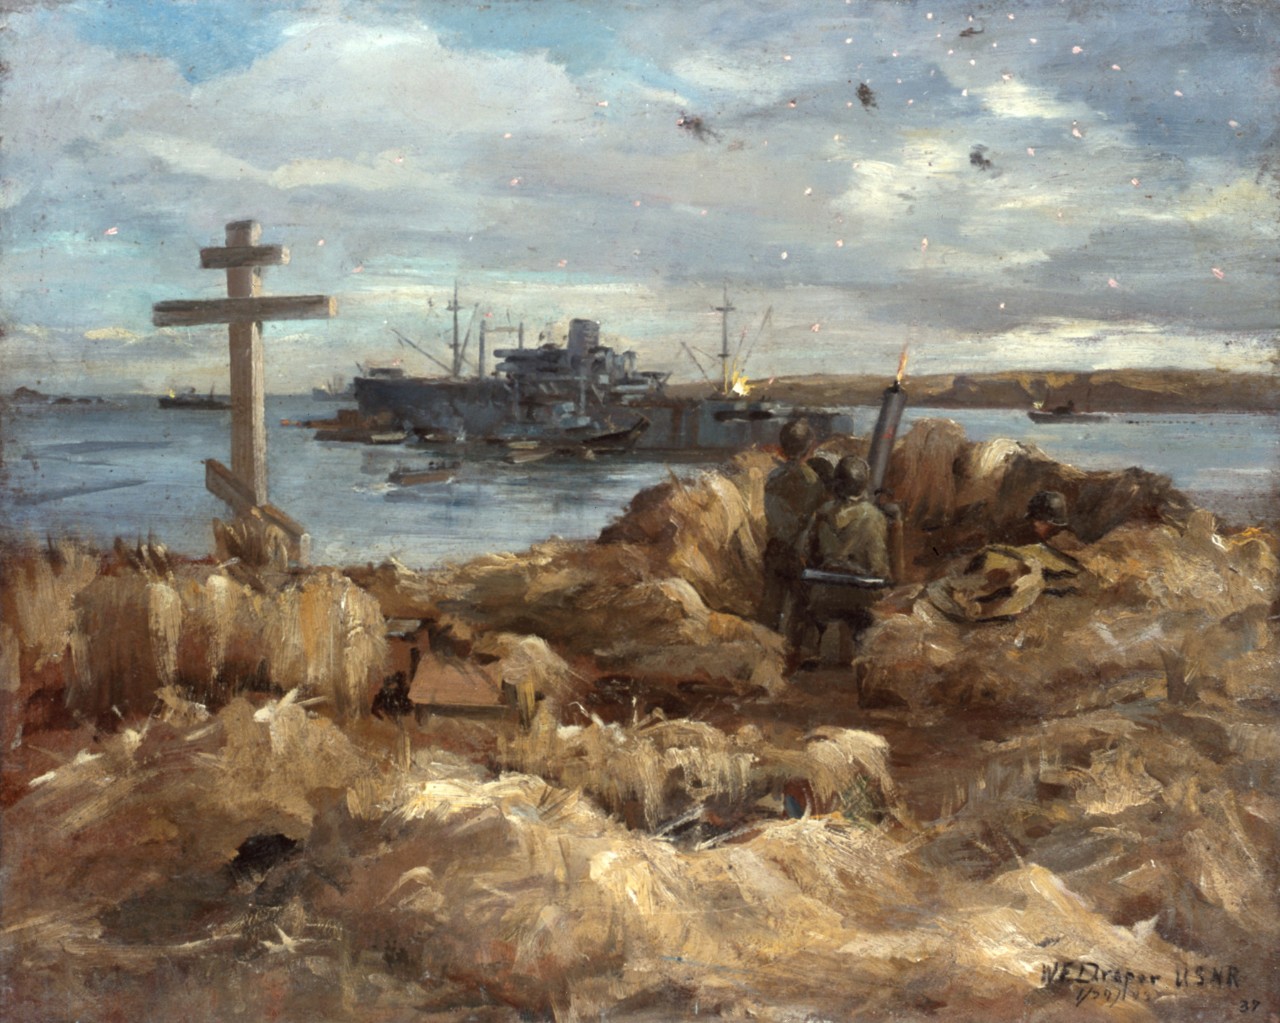 A view from a hill of a grave marker and ship traffic in the harbor